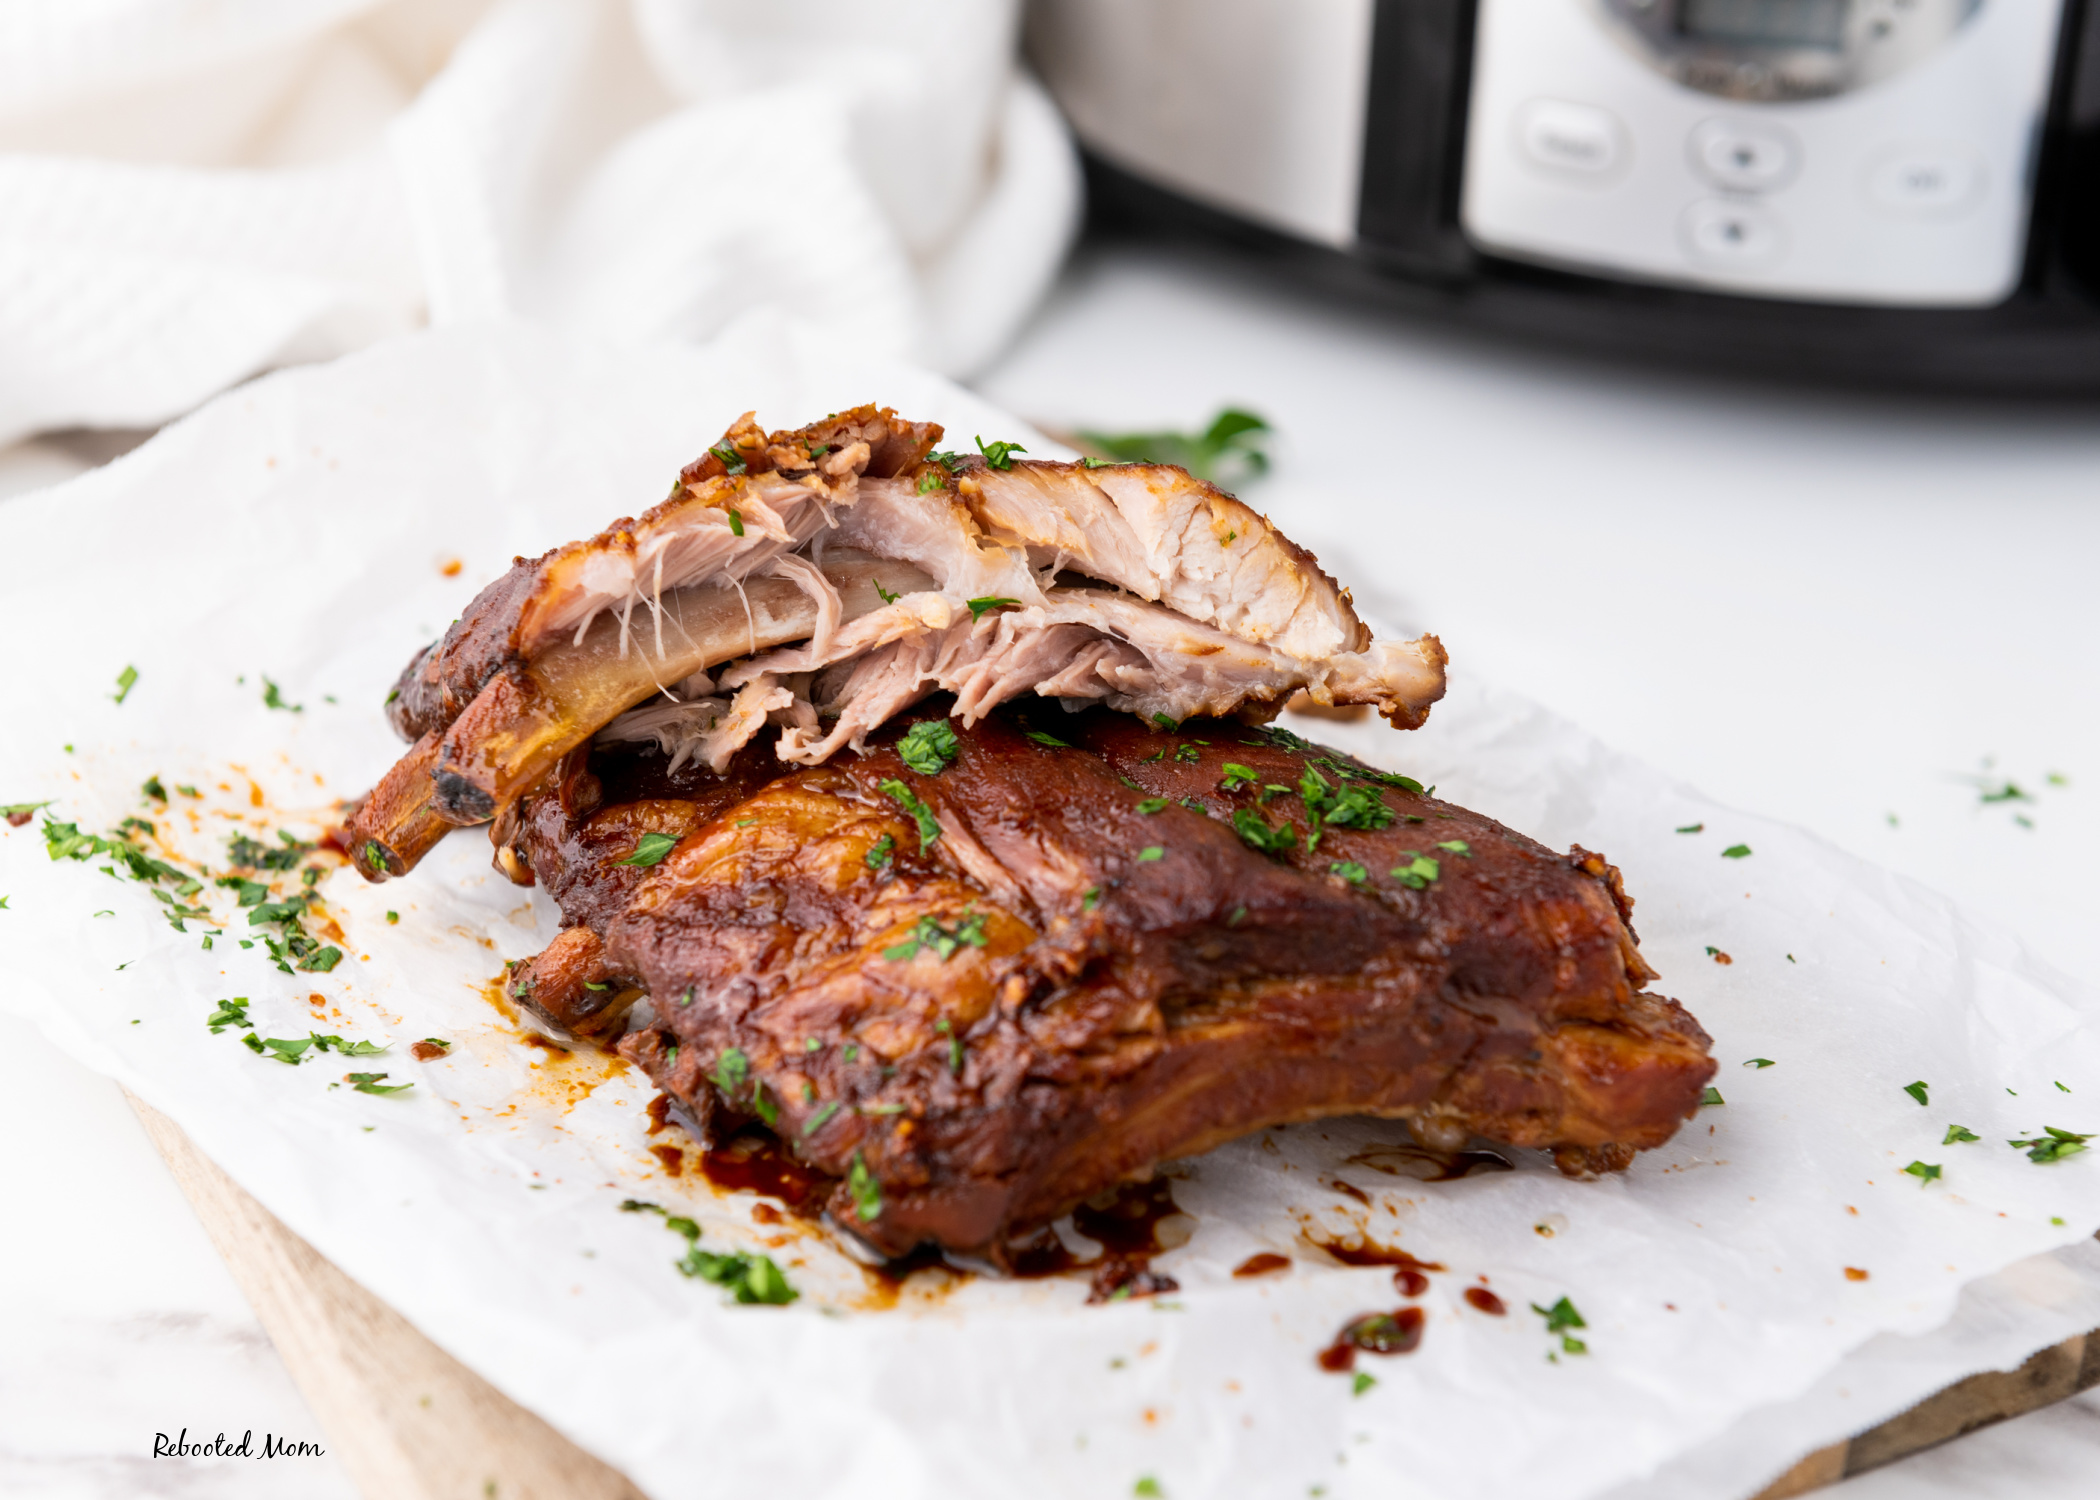 Slow Cooker Soy Spareribs come together easily with a handful of simple ingredients that result in the most addictive, flavorful ribs you'll ever try!